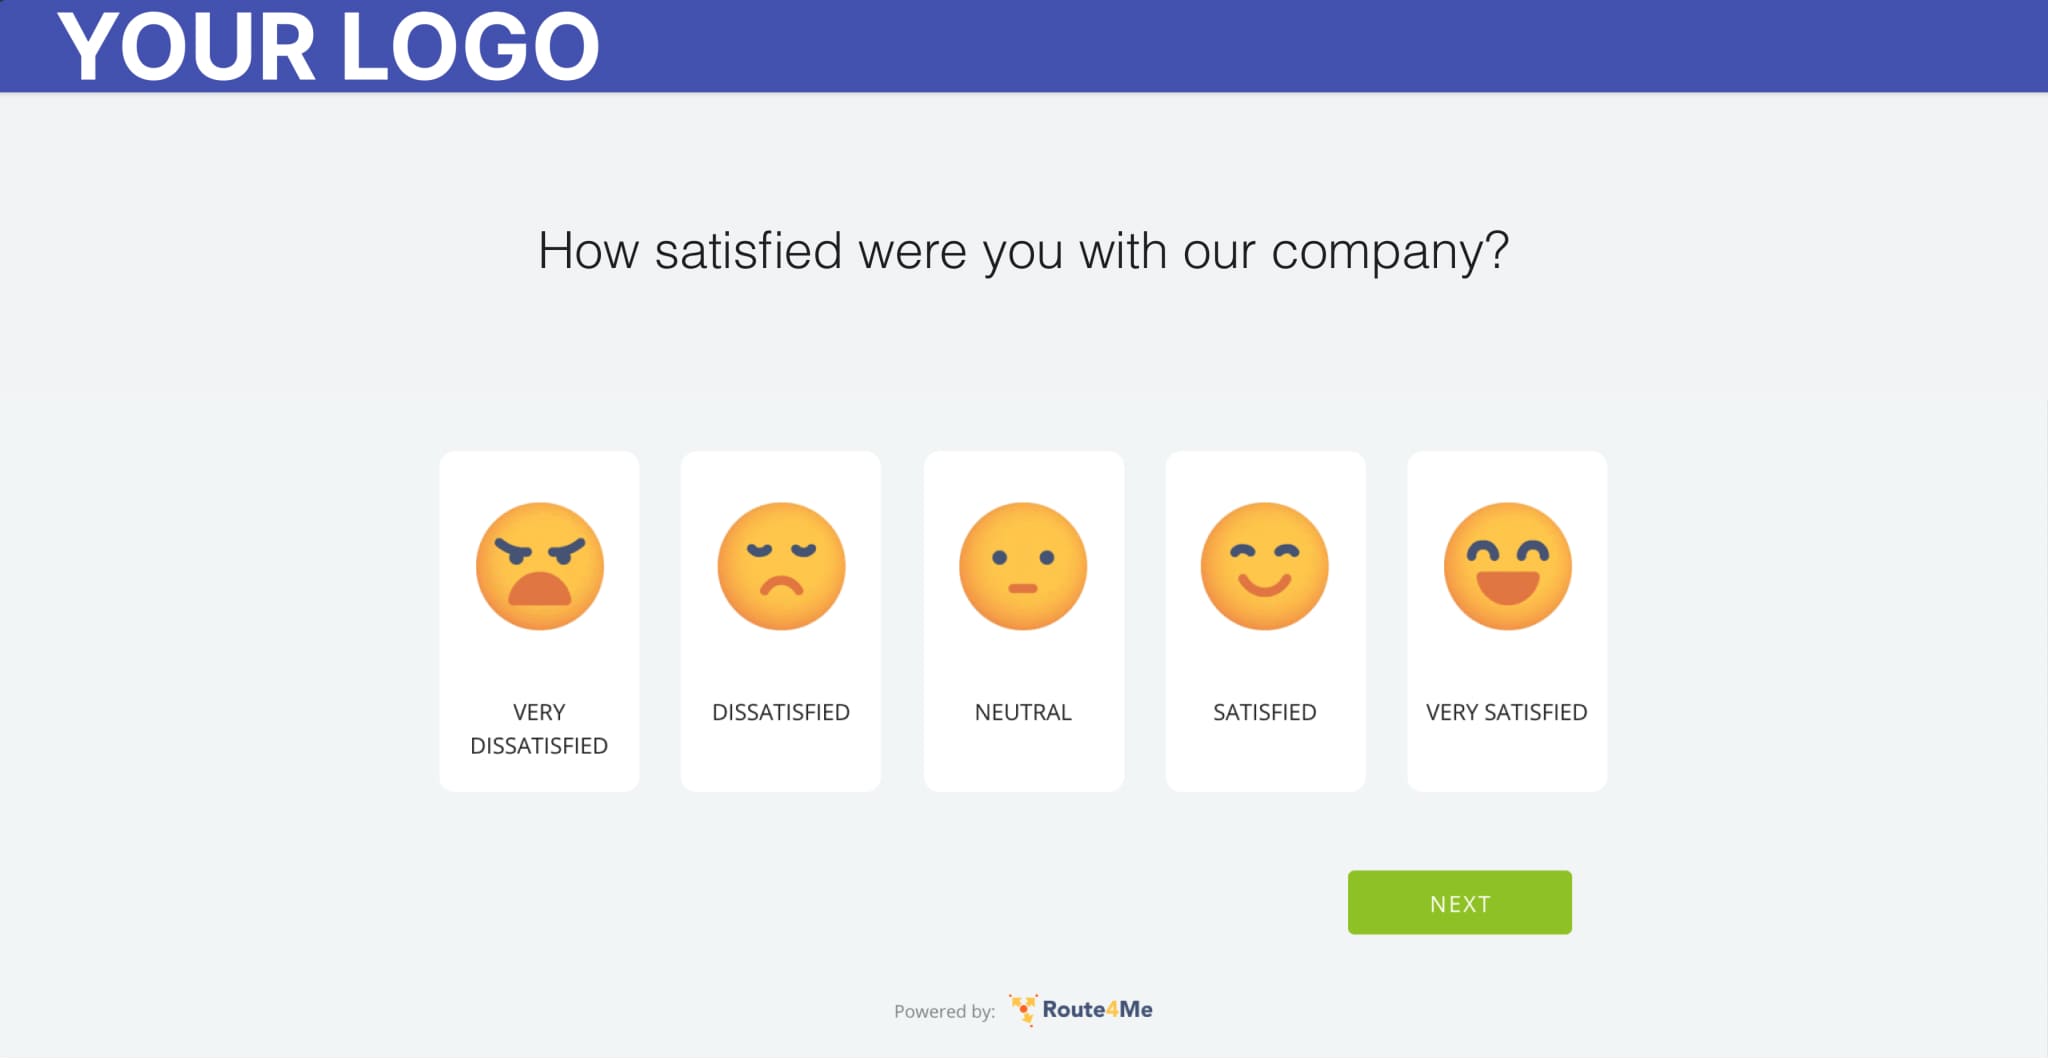 Customers can rate how satisfied they are with the service or delivery experience provided.